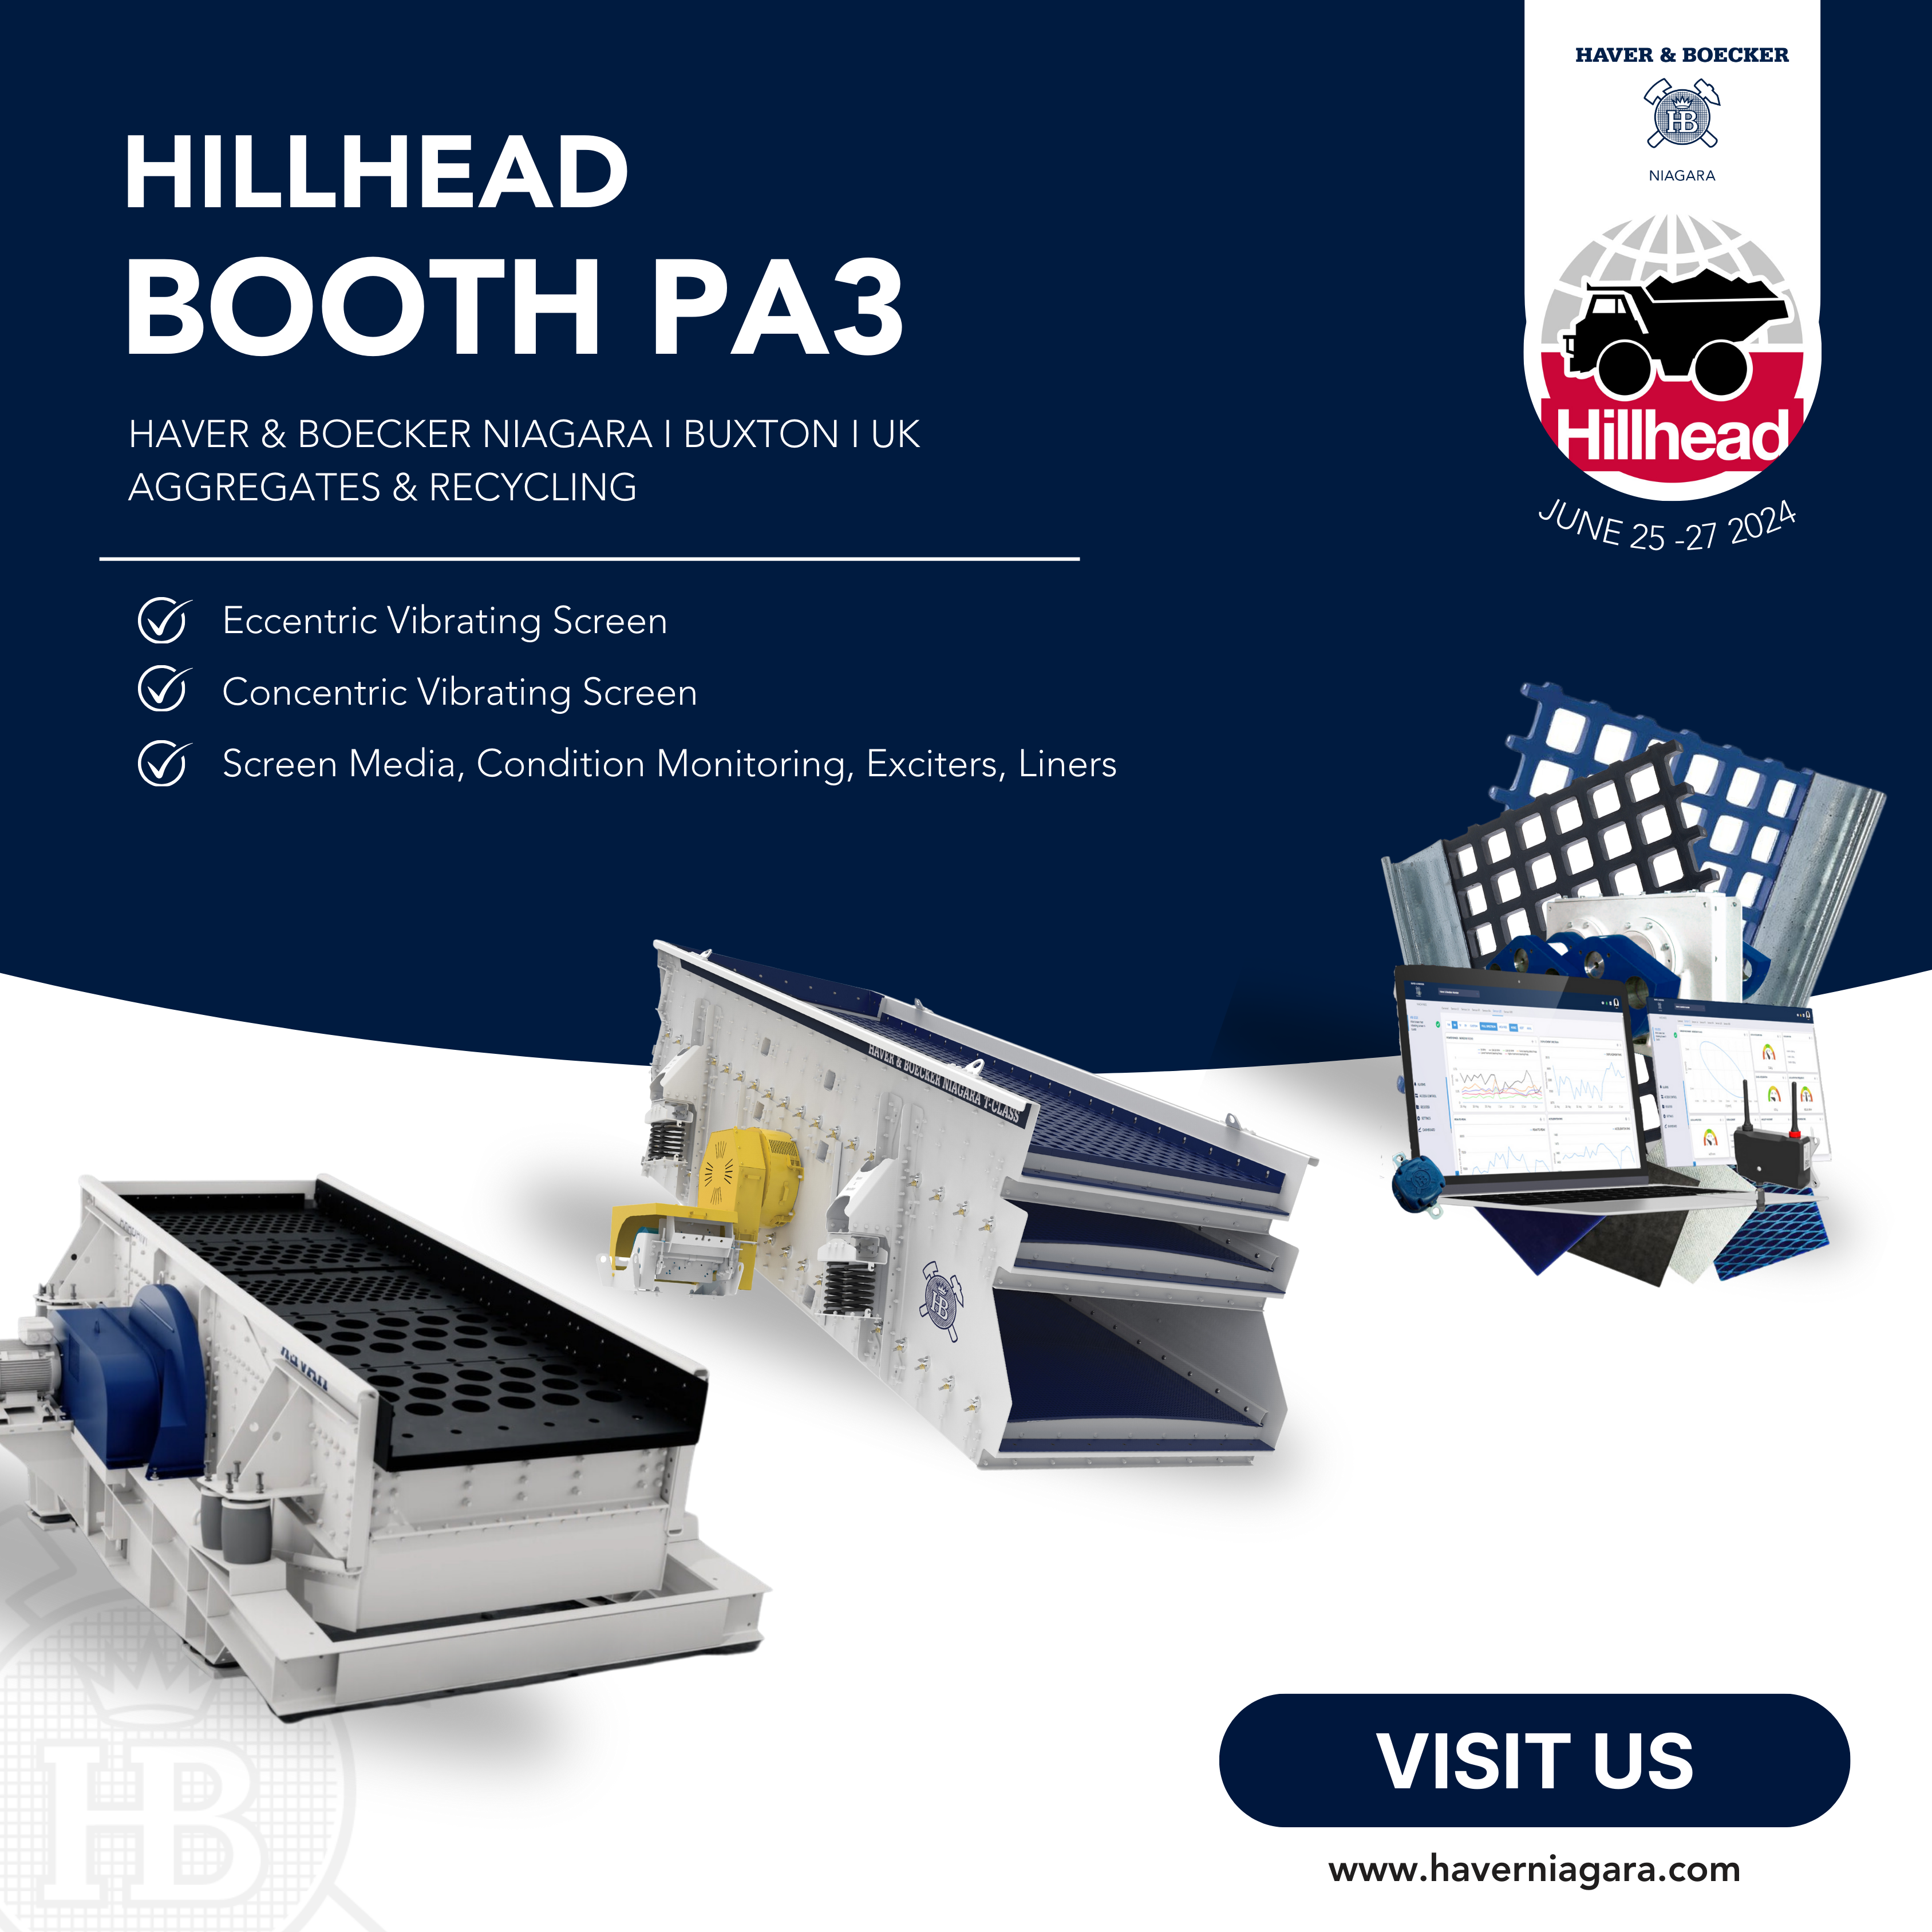 Haver & Boecker Niagara Joins Hillhead, Booth PA3: Unveiling Limitless Innovations In Processing Technology